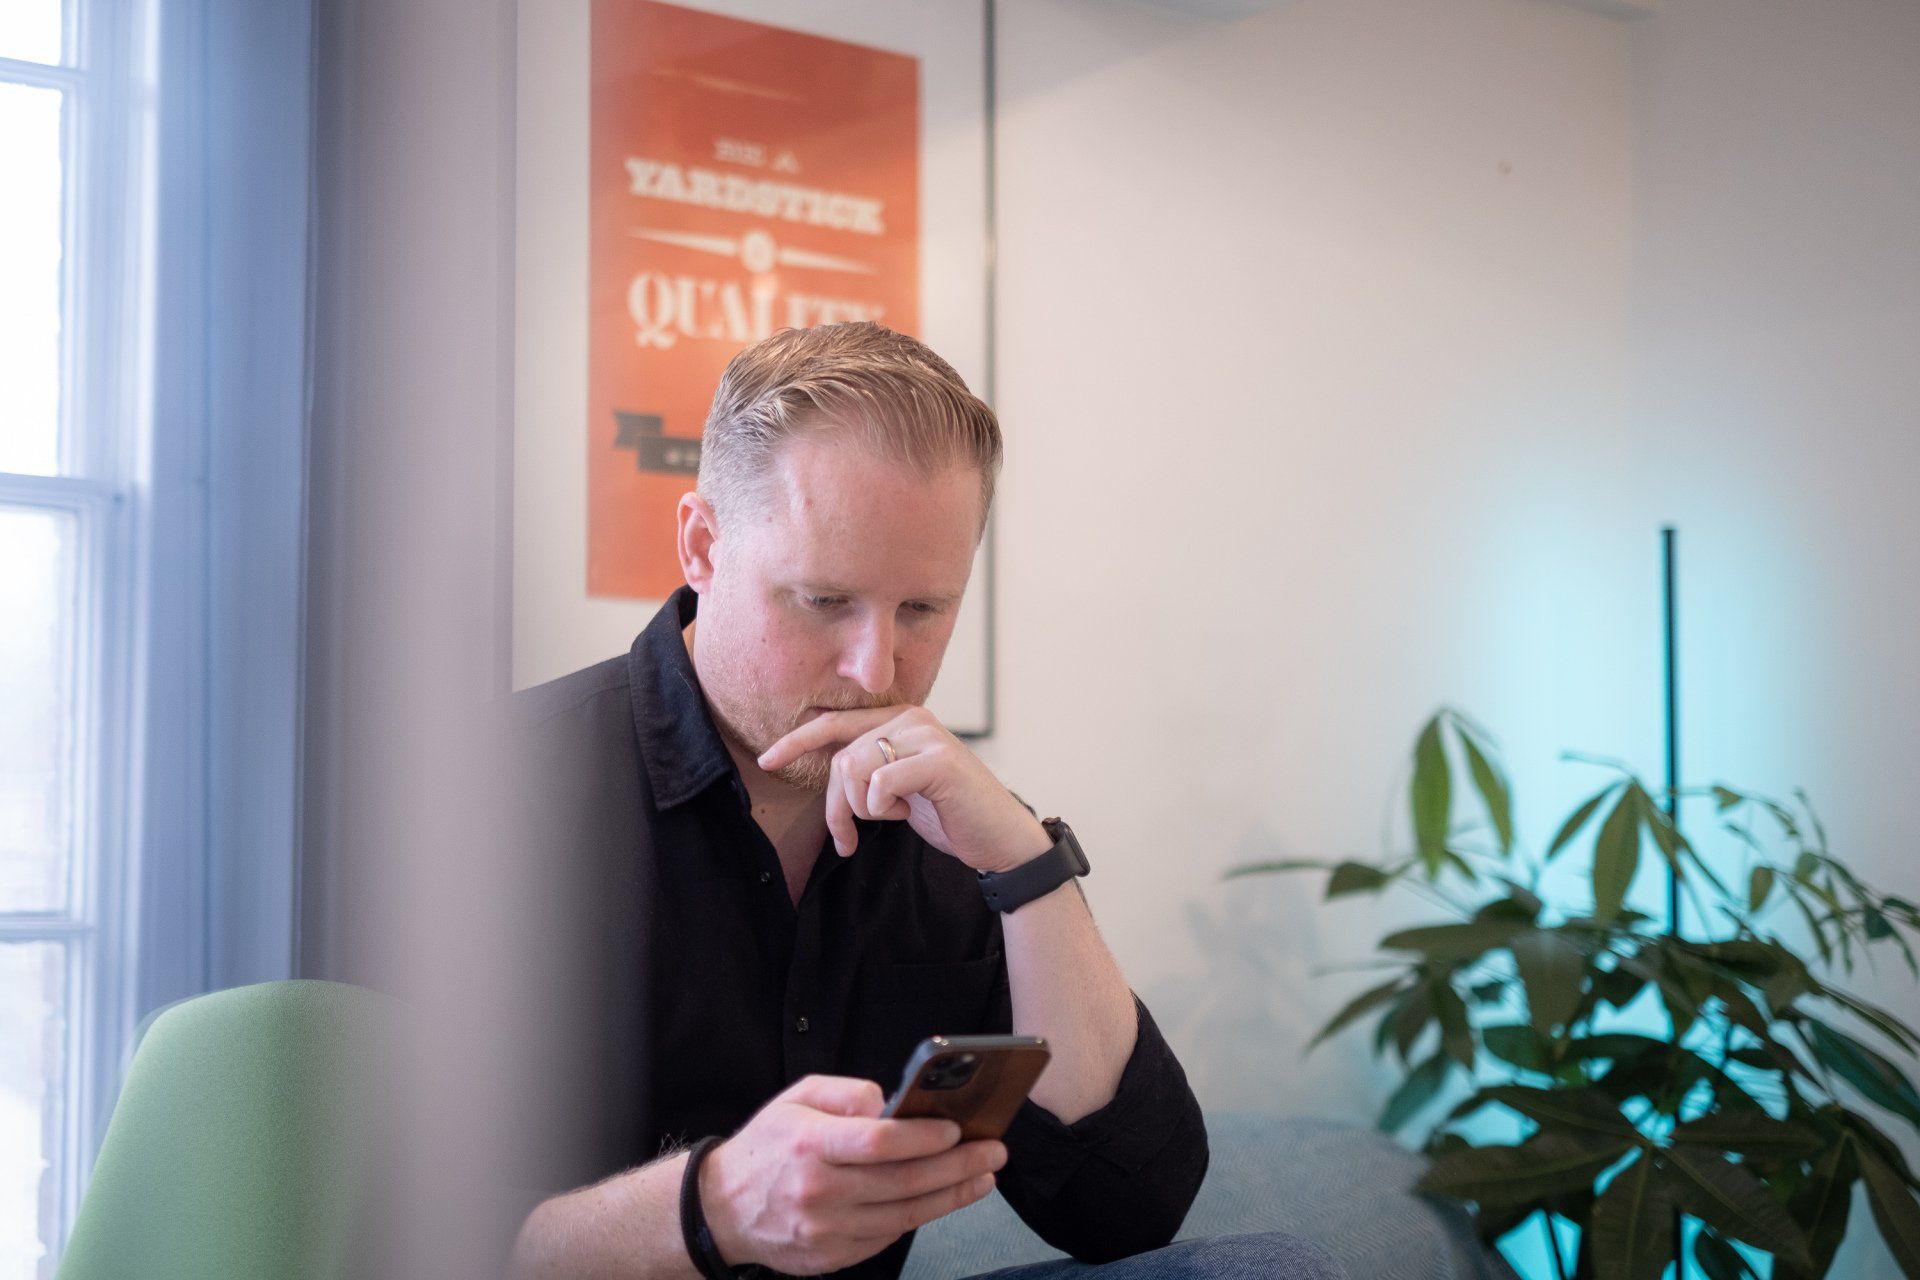 Russ, a white male with light hair wearing a black shirt and watch sits at a desk, looking at a phone in his hand.